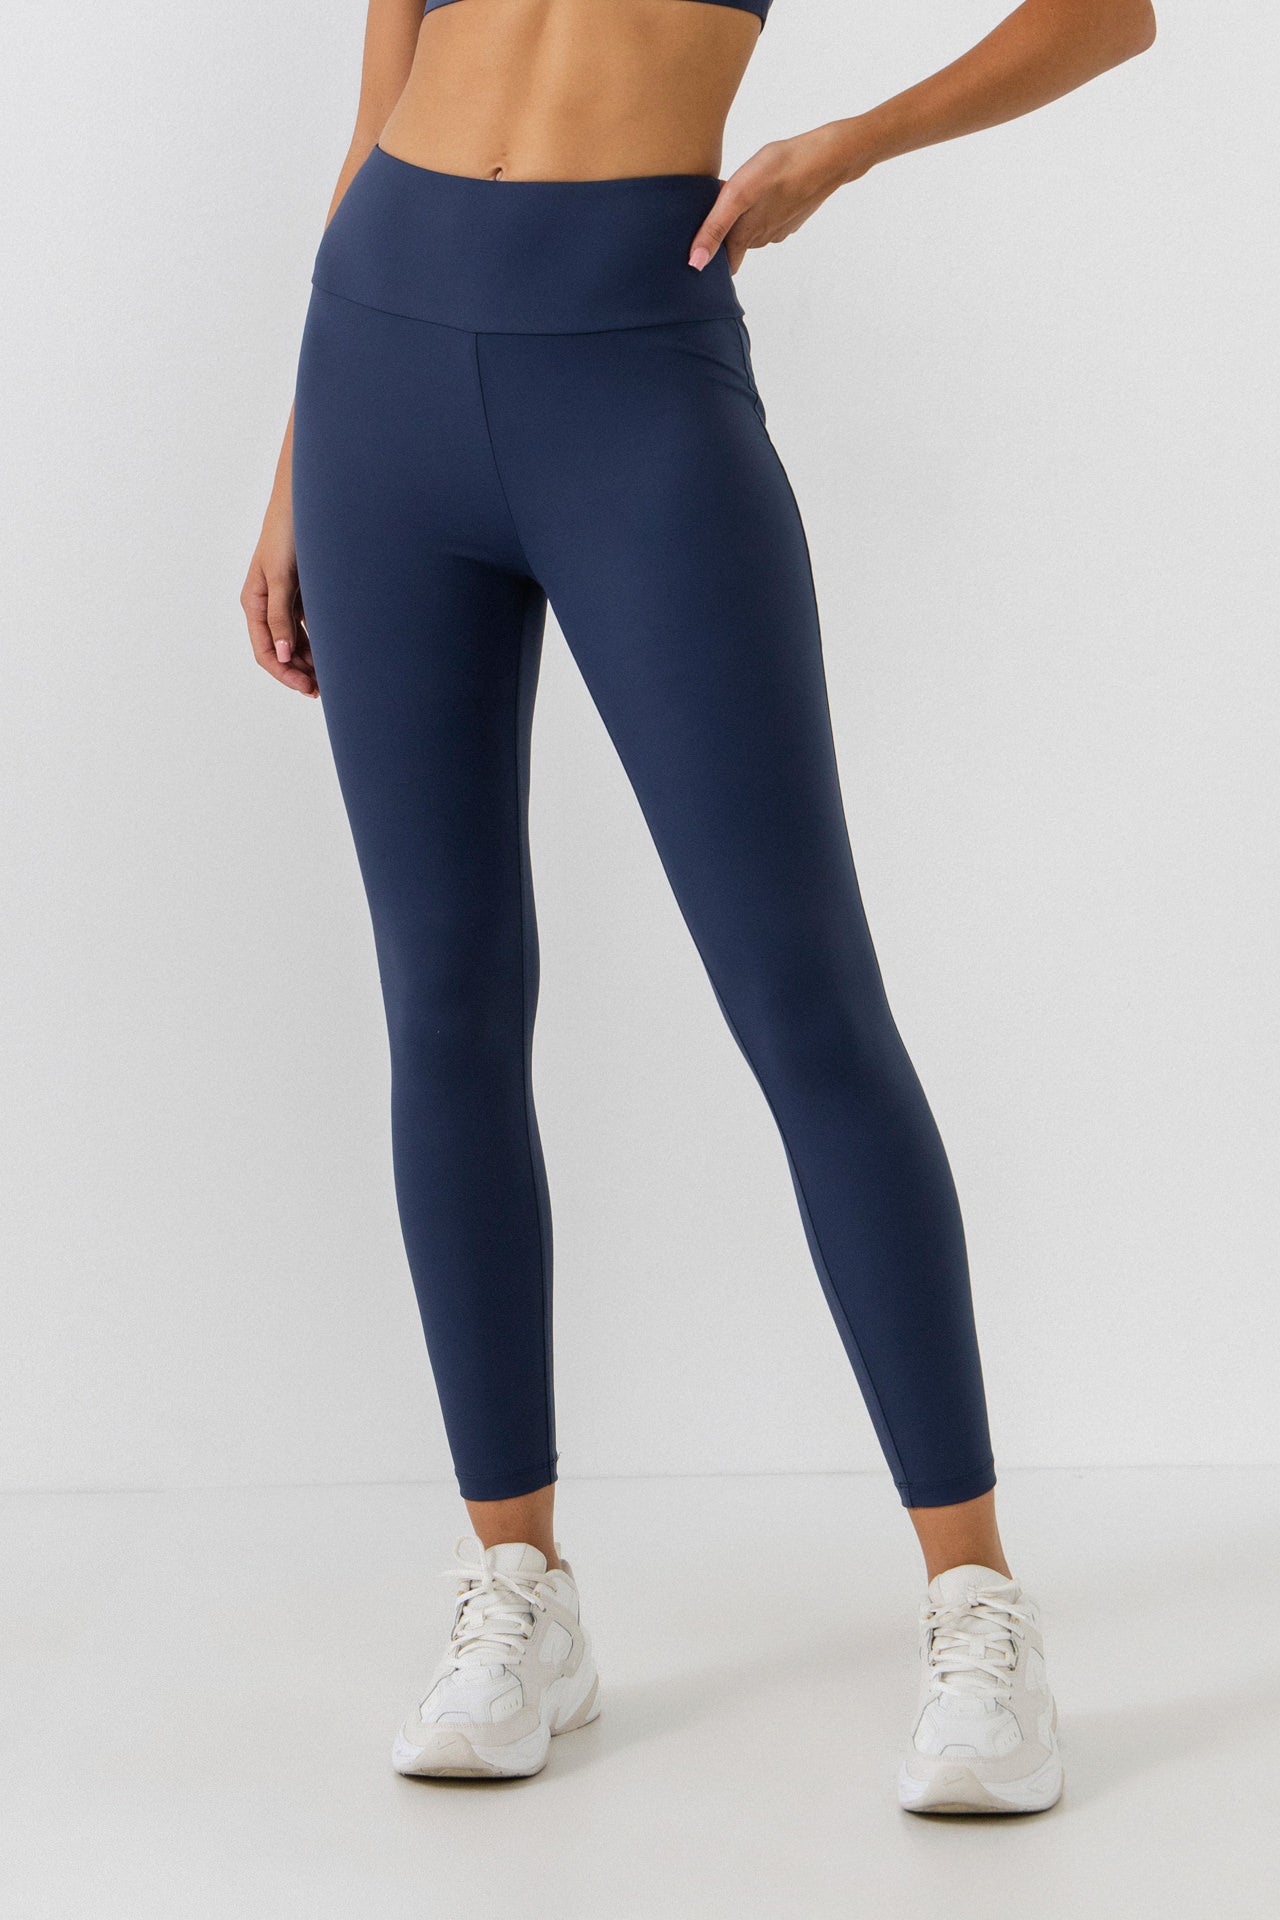 Buy LYRA Pumpkin Superior staple cotton Ankle Length Leggings.Look like new  even after repeated washing,Suitably designed to mould any body shape  perfectly. Online at Best Prices in India - JioMart.